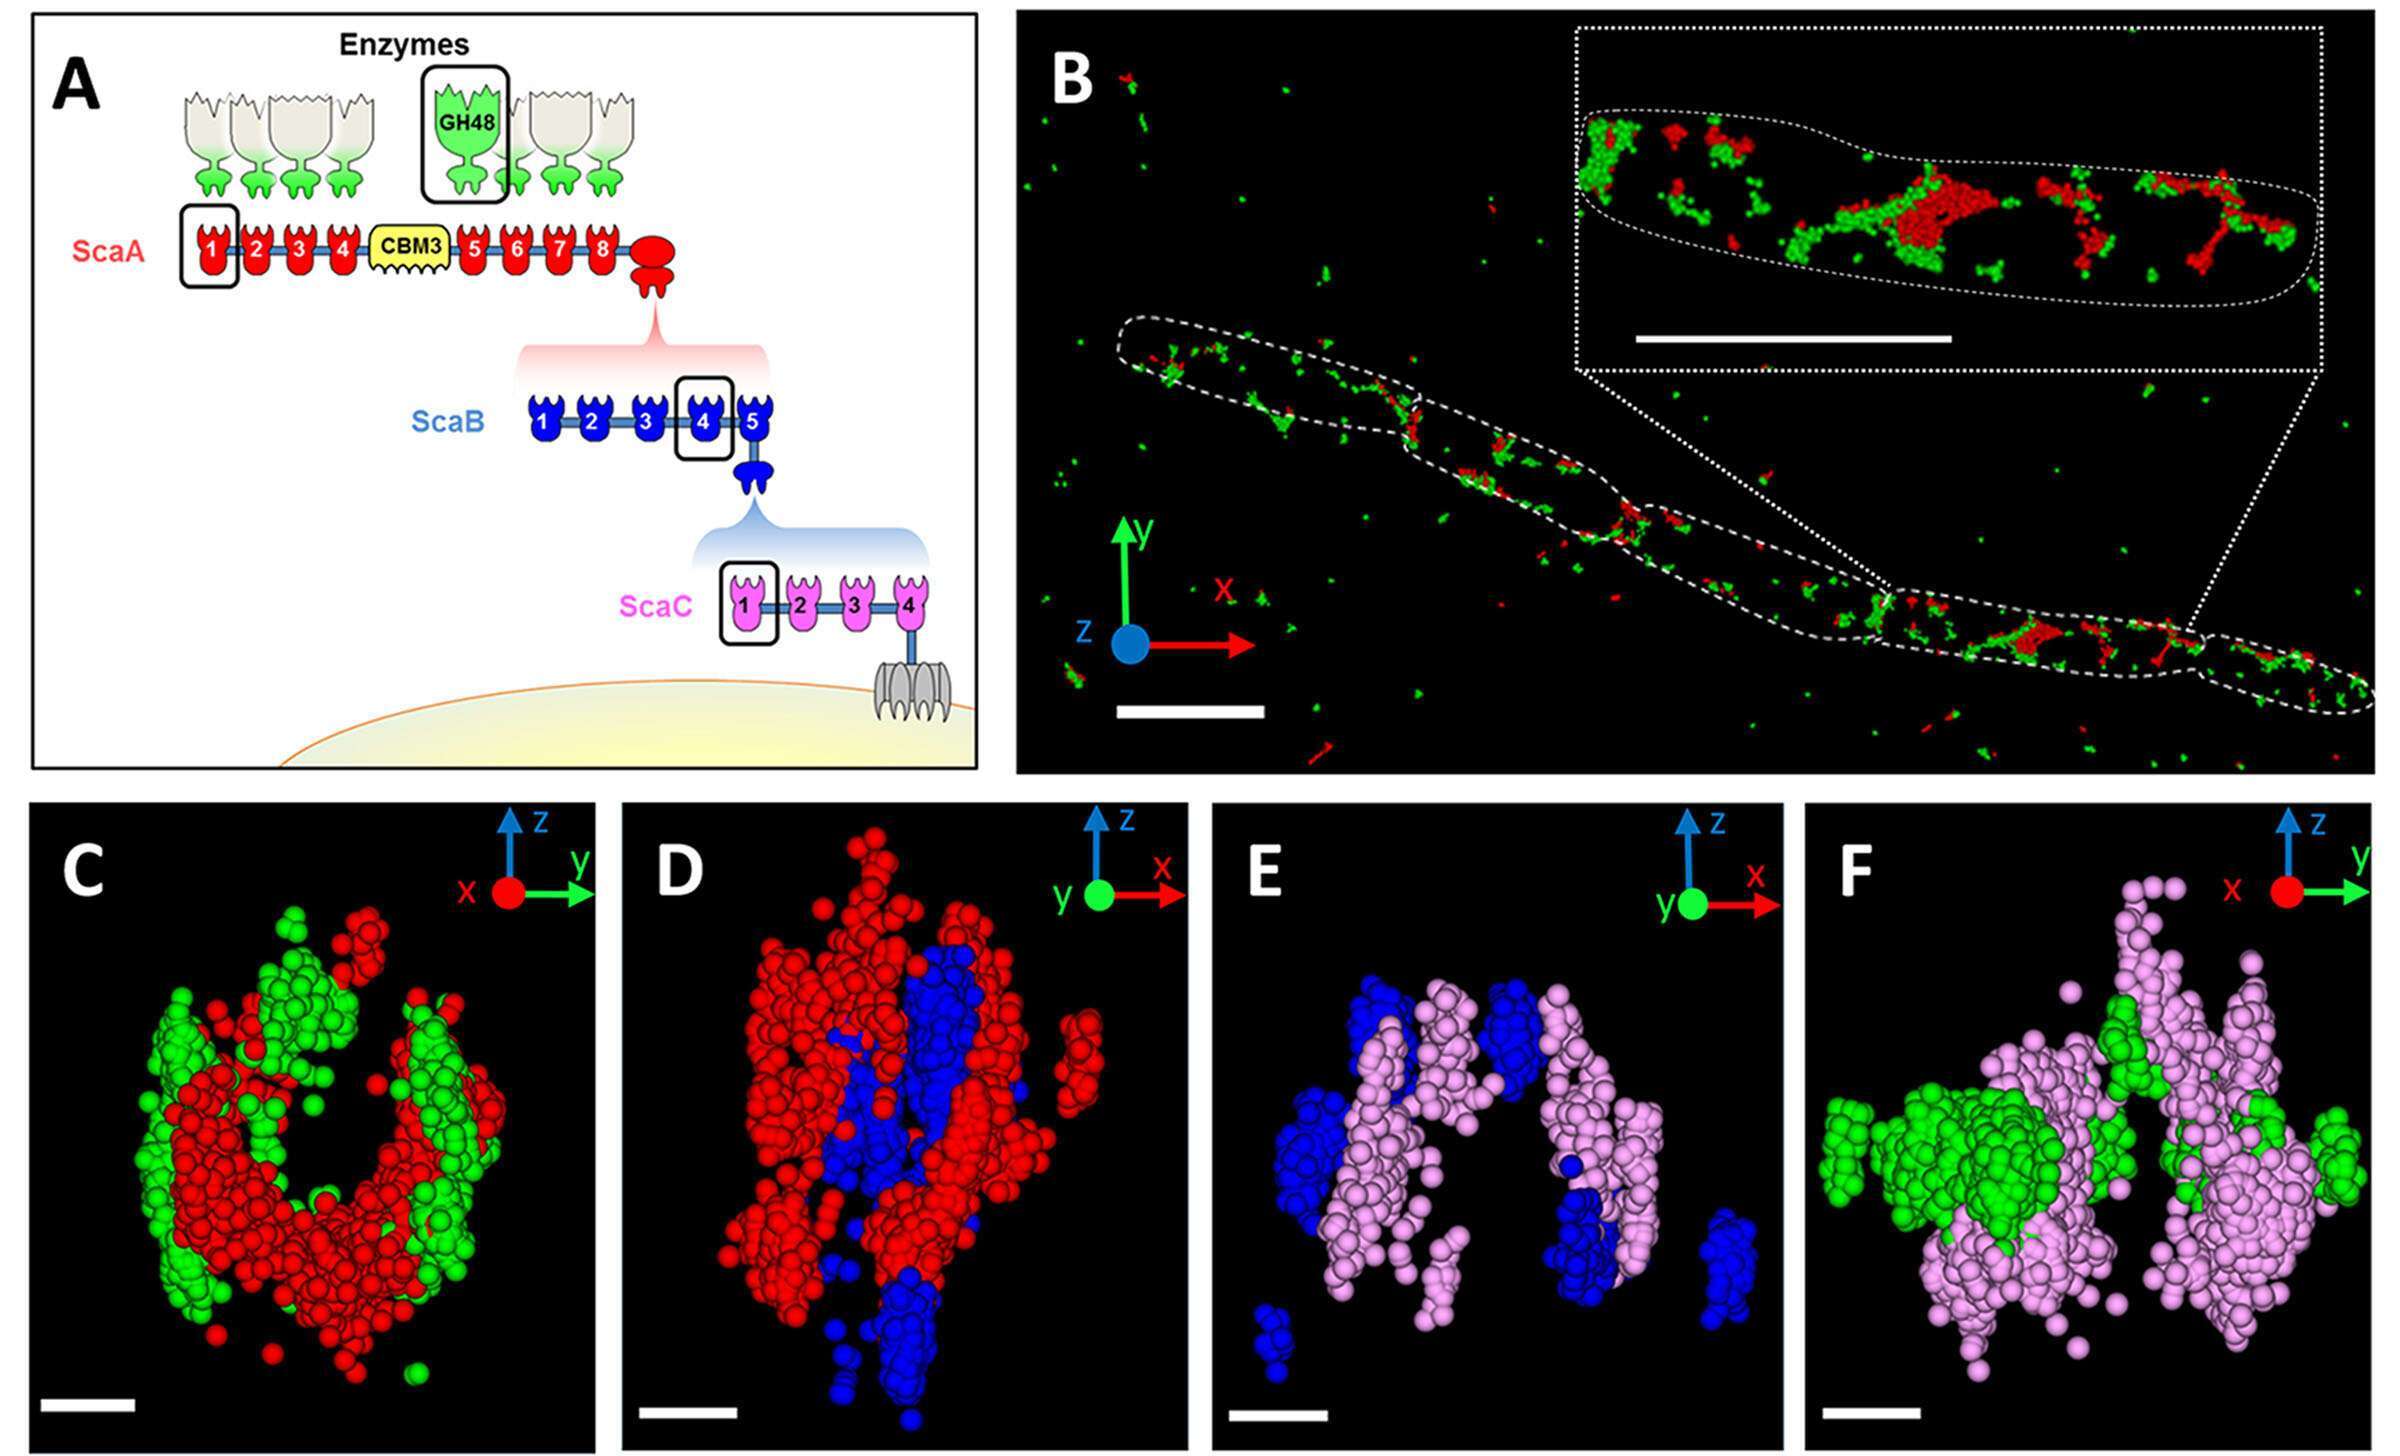 Figure 1: Hierarchical organization of cell-surface cellulosome components. (A) Schematic illustration of the major cellulosome system of C. clariflavum. Color-coded cohesins (Coh) and enzyme (GH48) components circled in black were immunolabeled during experiments. (B) Representative 3D STORM image of cellobiose-grown cells labeled with anti-GH48 (green) and anti-CohA (red). Scale bar, 2 µm. (C to F) Representative cross-sectioned STORM images of selected bacterial cells immunolabeled with pairs of antibodies (scale bars, 300 µm). A portion of each bacterium was sectioned and rotated 90° for viewing through its long axis. (C) Anti-GH48 (green) and anti-CohA (red); (D) anti-CohA (red) and anti-CohB (blue); (E) anti-CohB (blue) and anti-CohC (pink); (F) anti-CohC (pink) and anti-GH48 (green). 